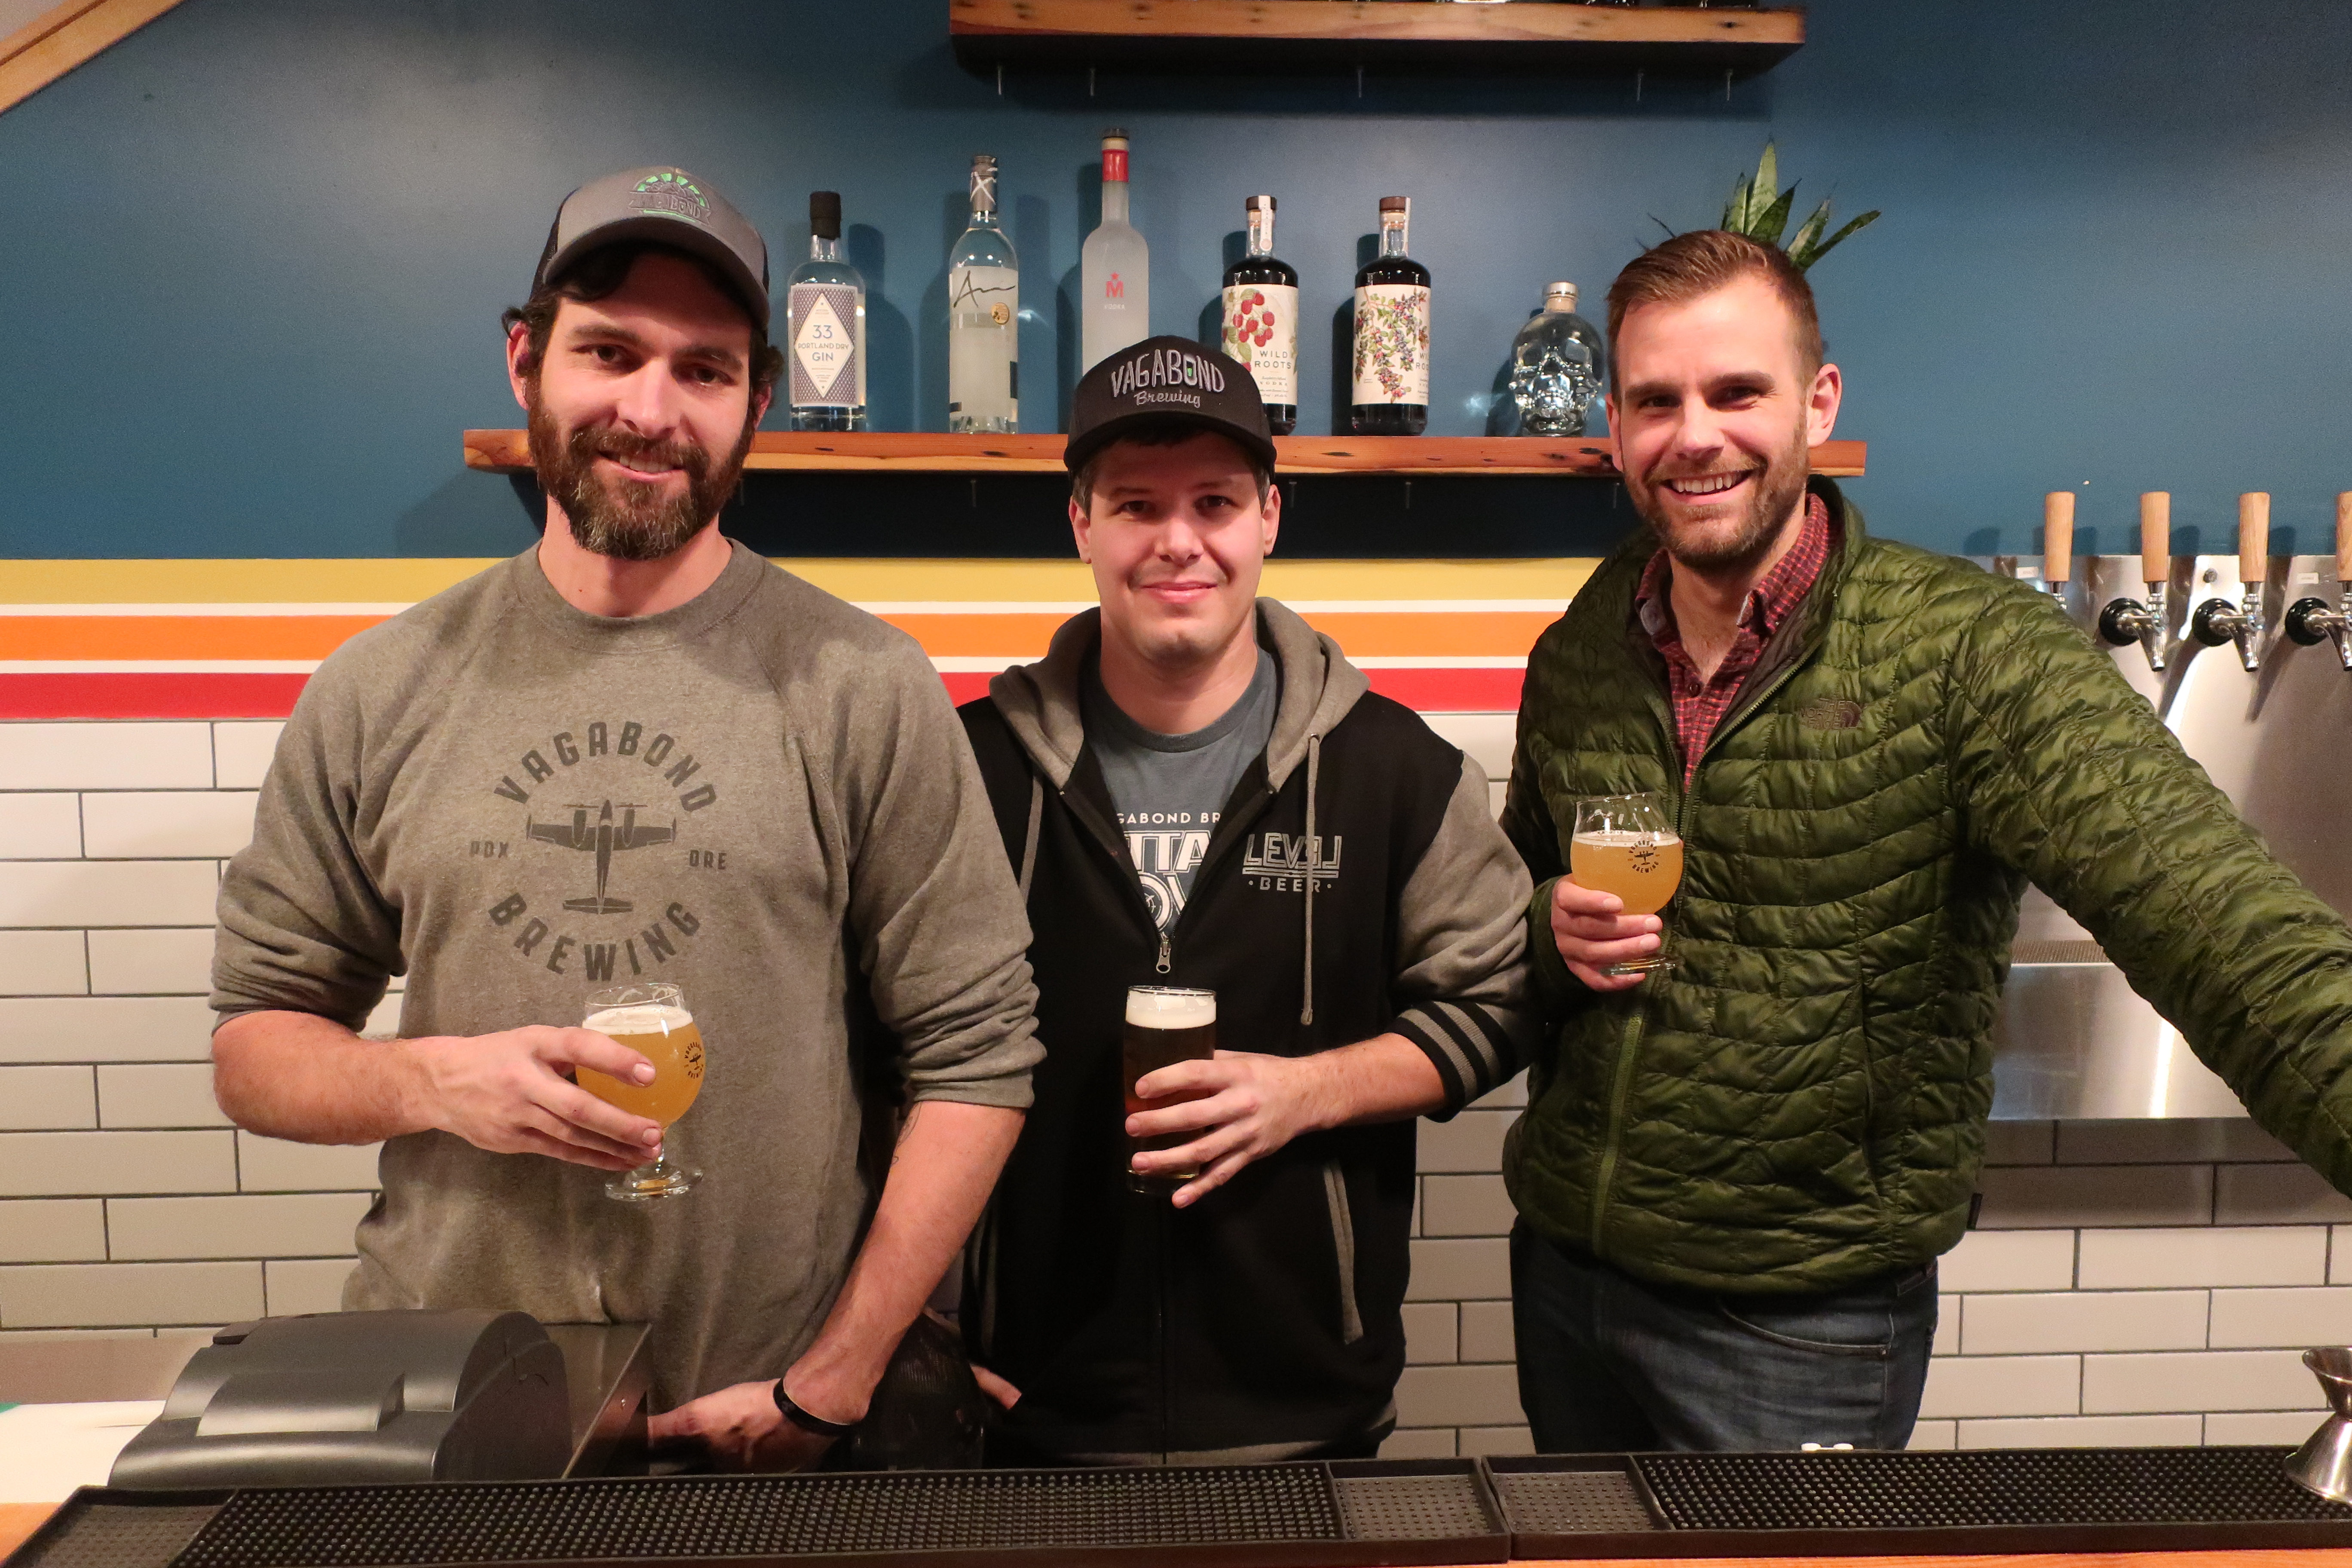 Vagabond Brewing co-founders - Dean Howes, James Cardwell, and Alvin (A.J.) Klausen.